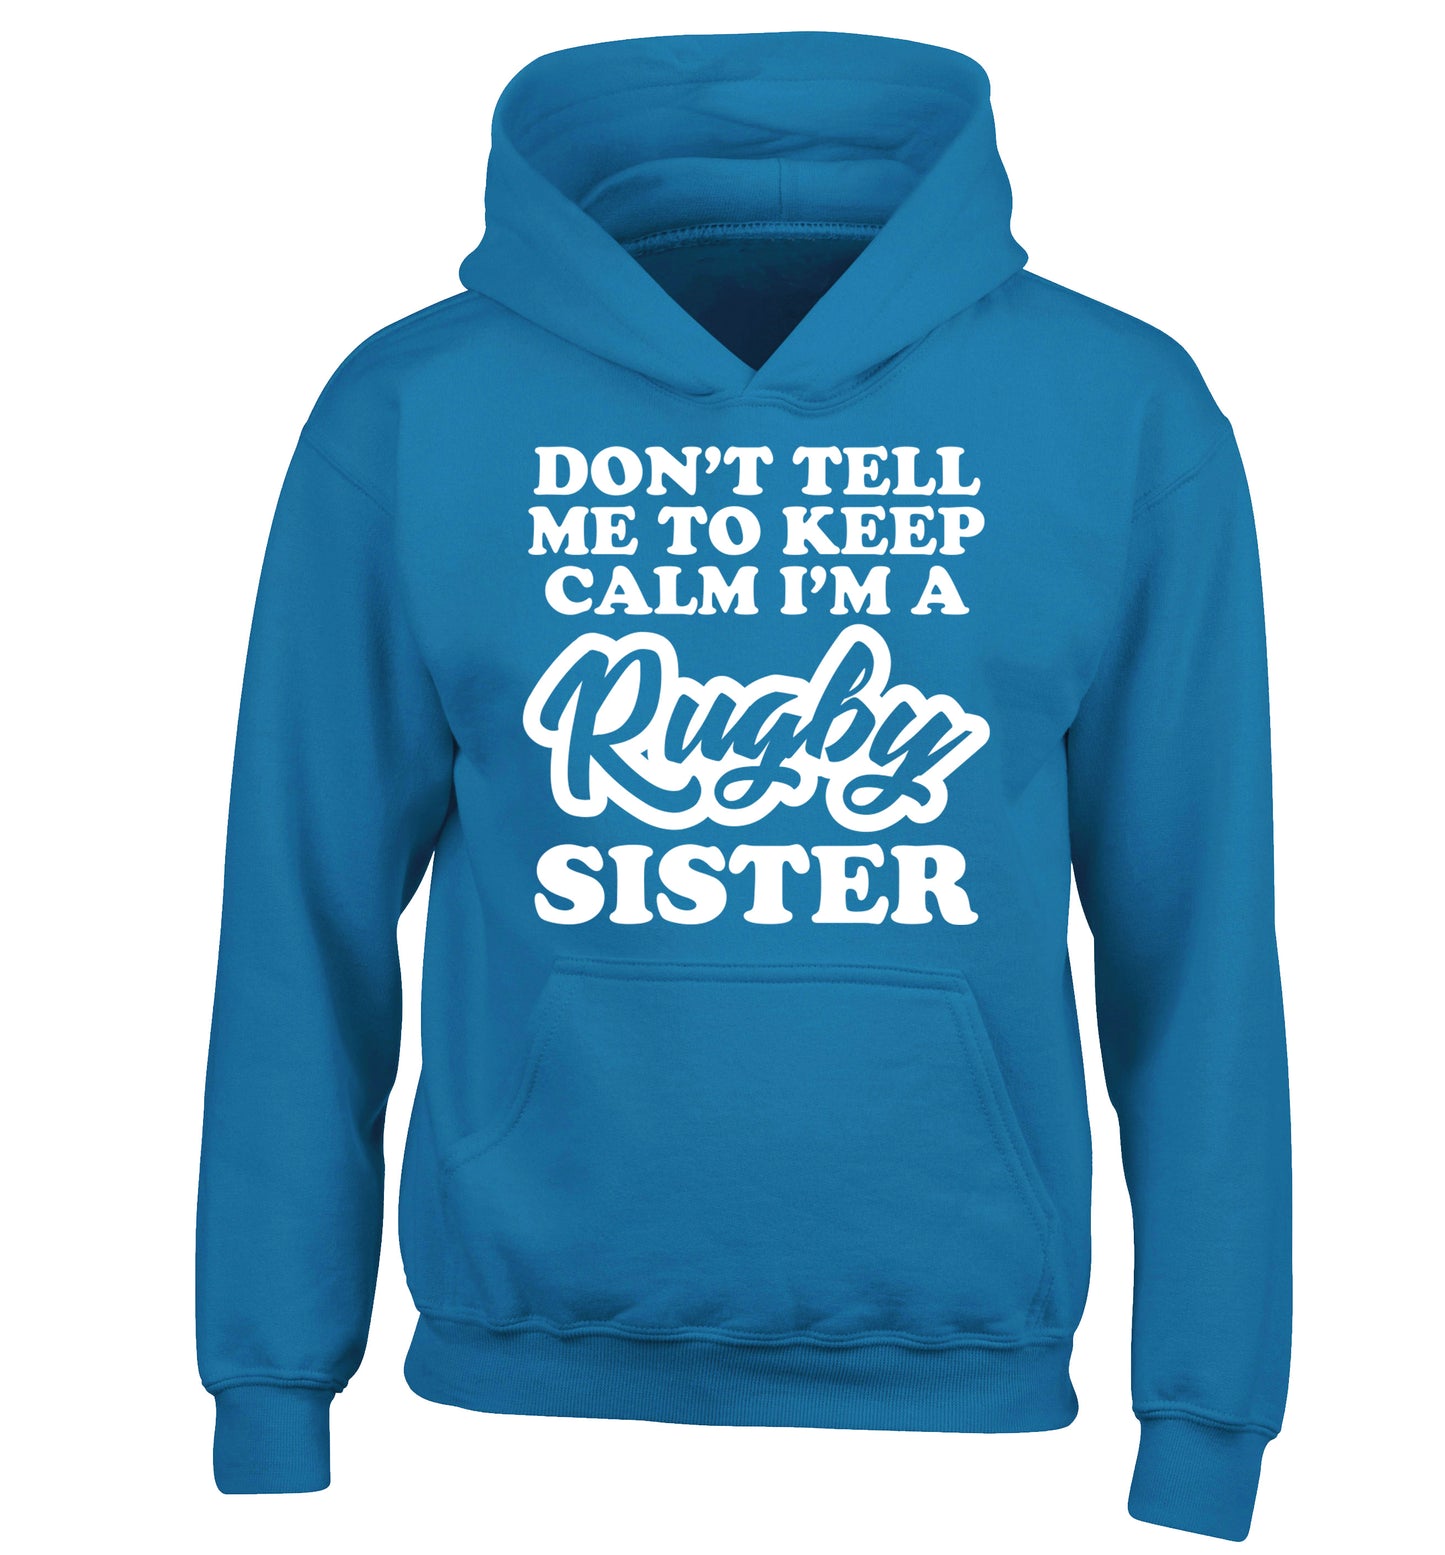 Don't tell me keep calm I'm a rugby sister children's blue hoodie 12-13 Years